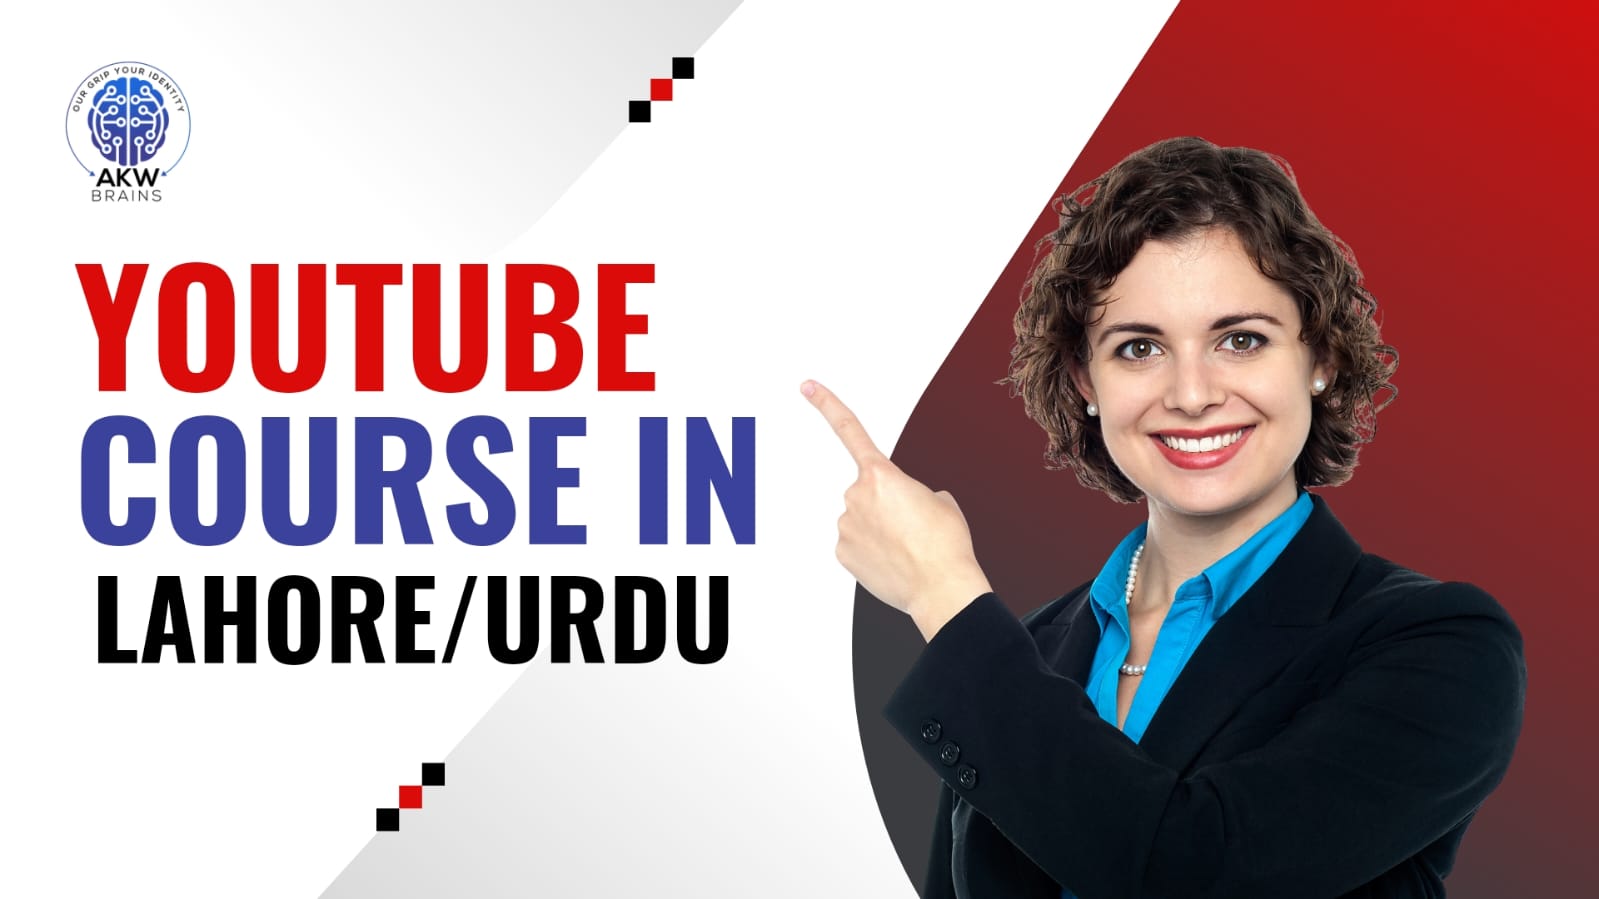 YouTube course in Lahore